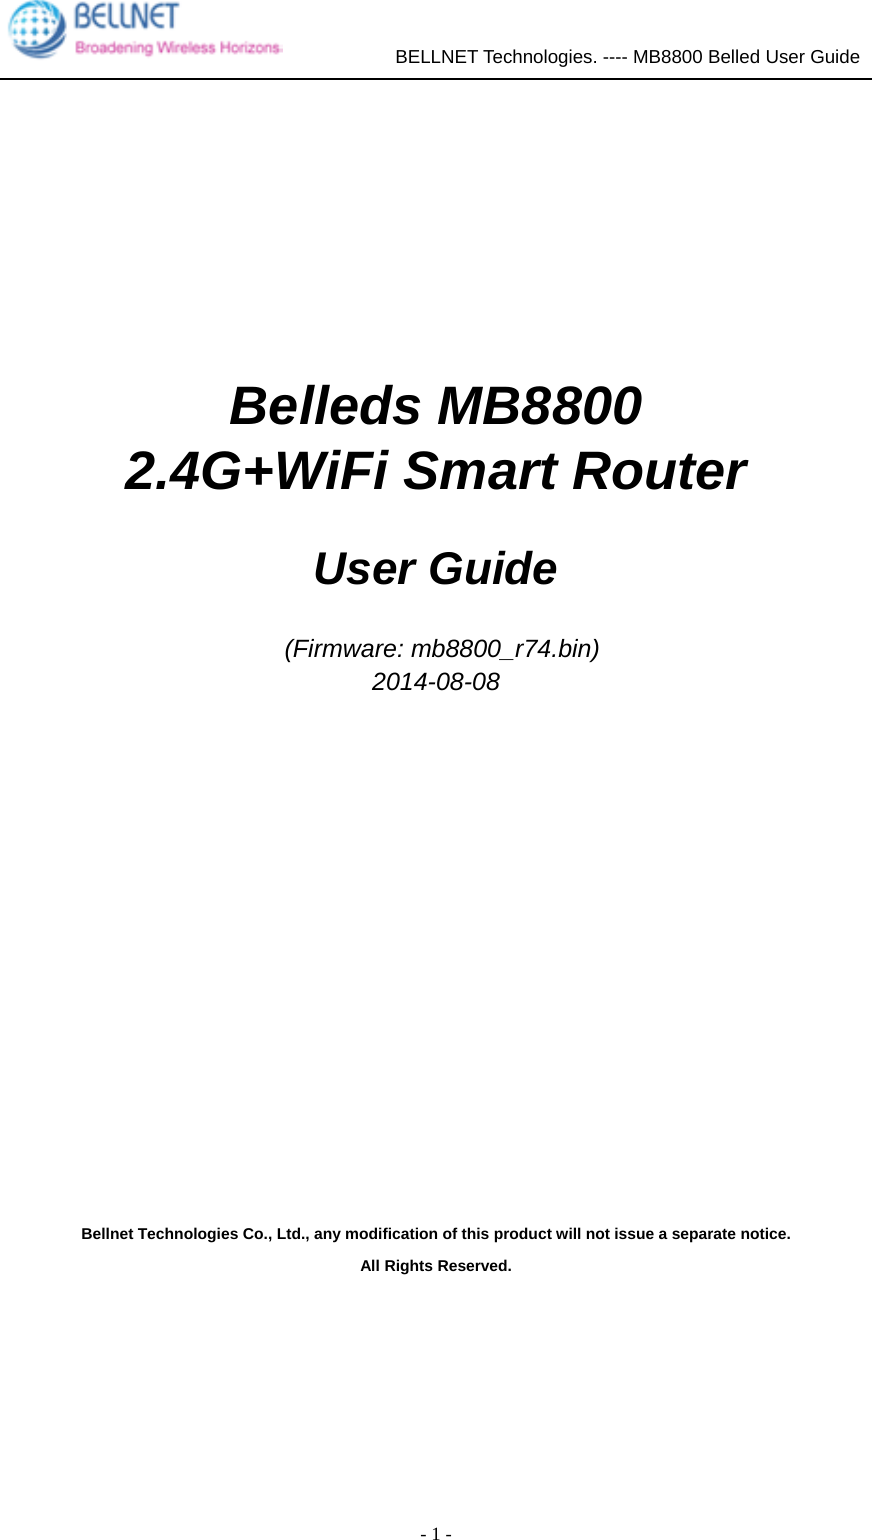             BELLNET Technologies. ---- MB8800 Belled User Guide  - 1 -          Belleds MB8800   2.4G+WiFi Smart Router  User Guide   (Firmware: mb8800_r74.bin) 2014-08-08         Bellnet Technologies Co., Ltd., any modification of this product will not issue a separate notice. All Rights Reserved.    